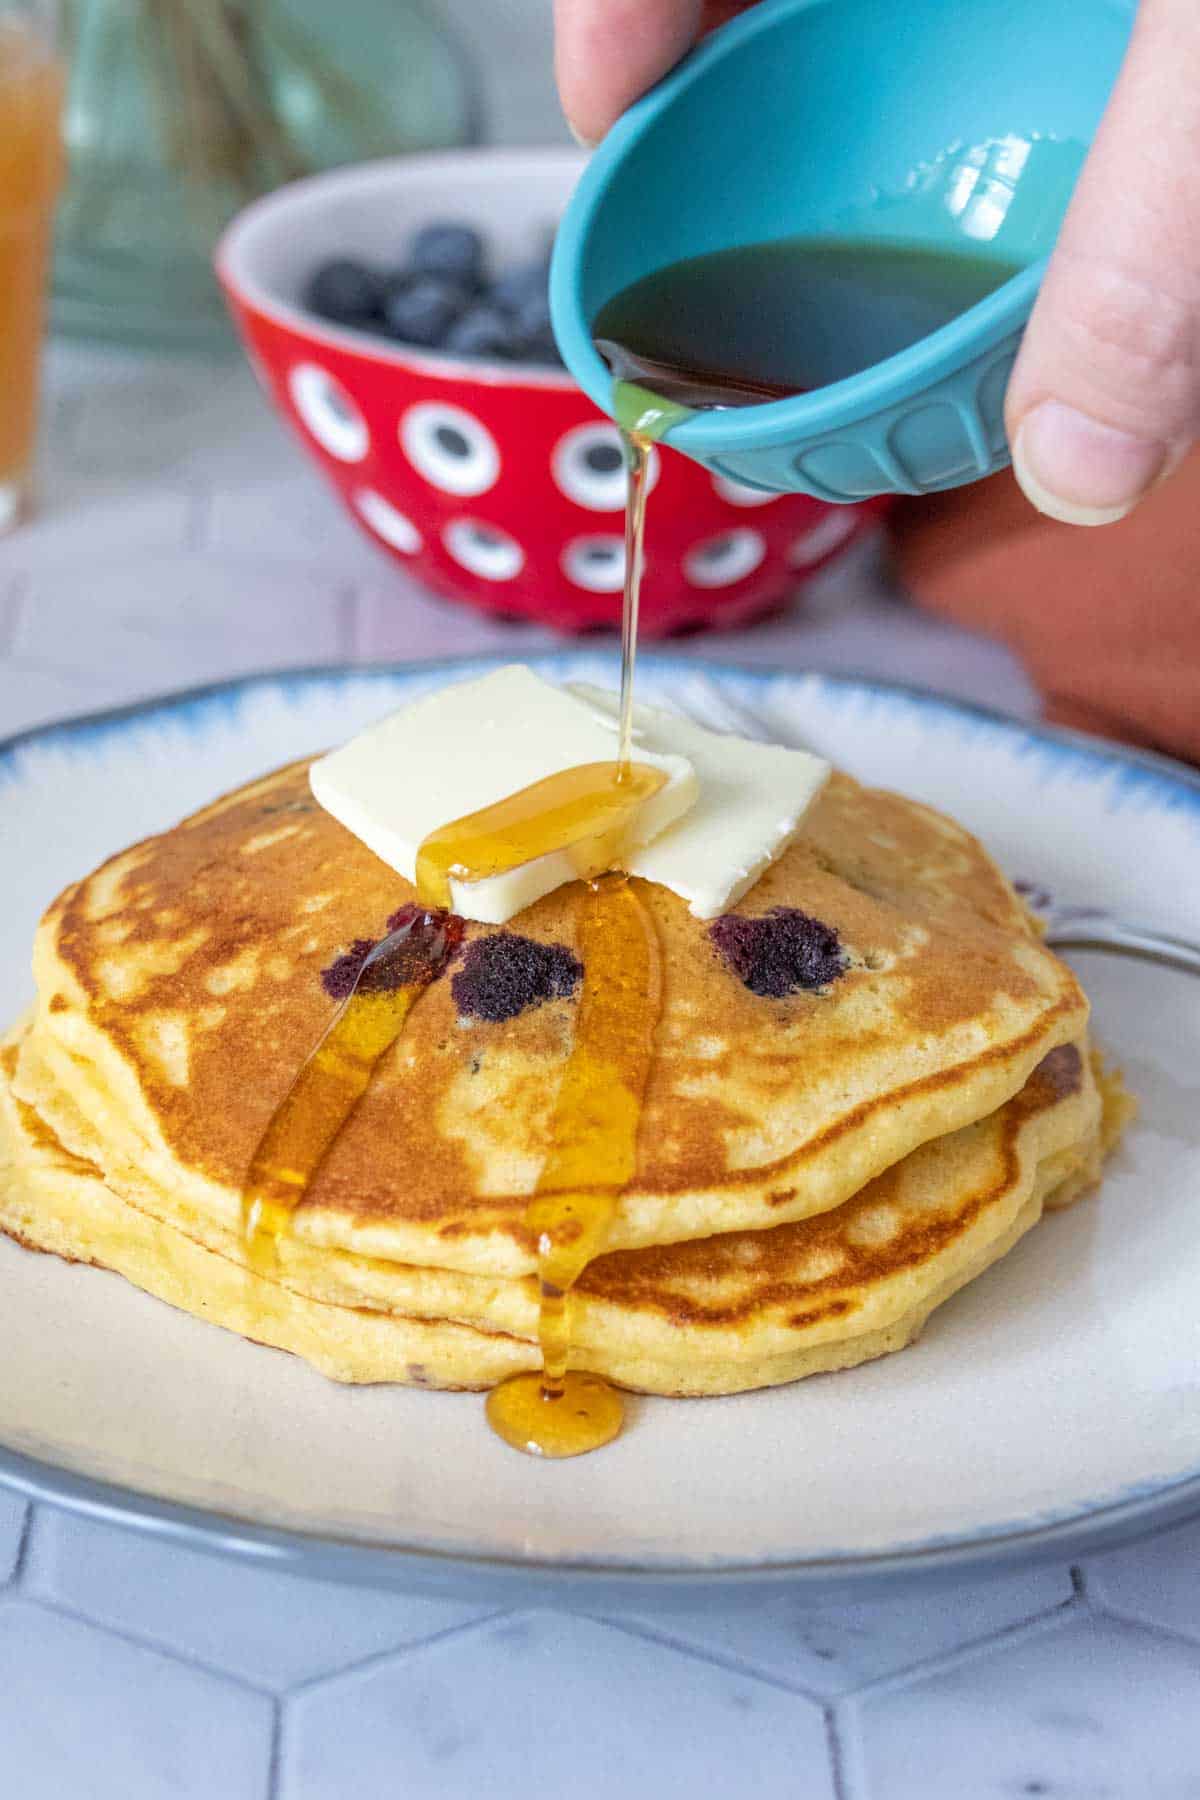 Pouring syrup onto a plate of blueberry pancakes.